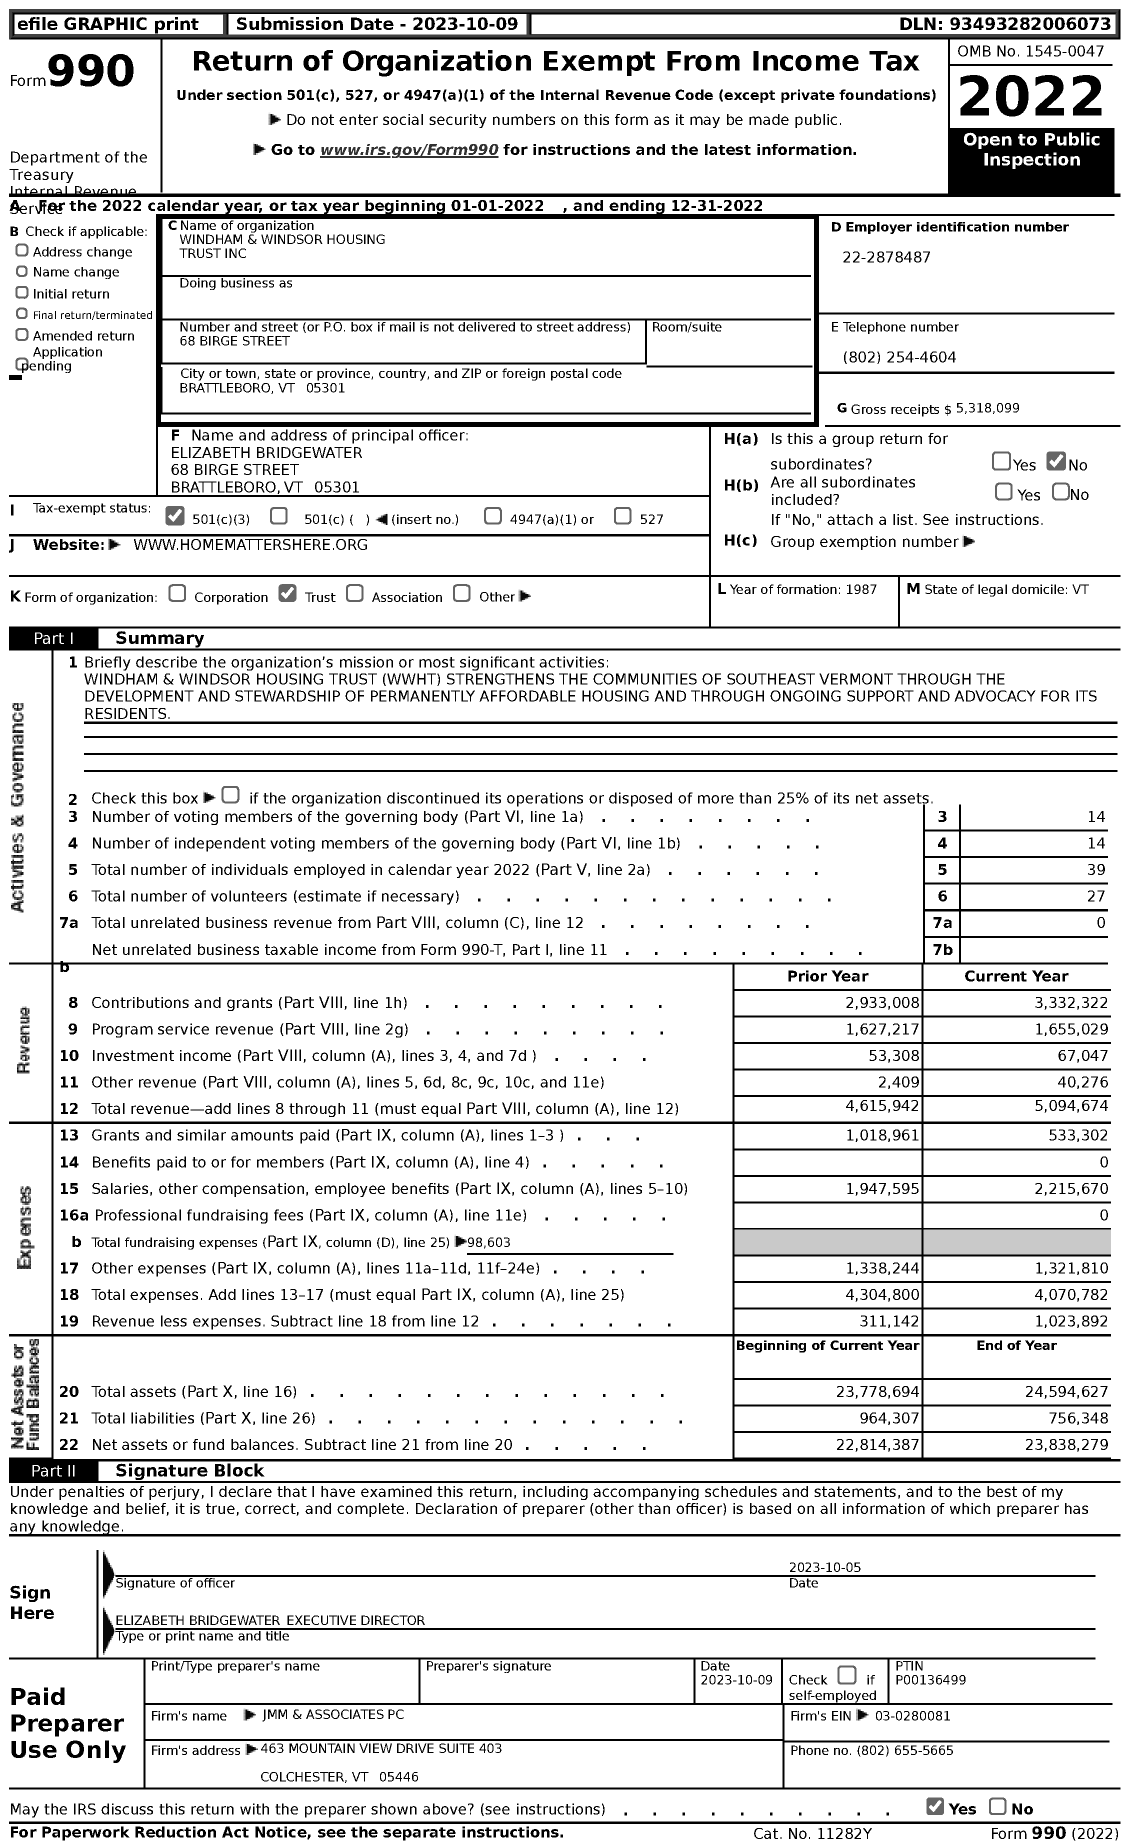 Image of first page of 2022 Form 990 for Windham and Windsor Housing Trust